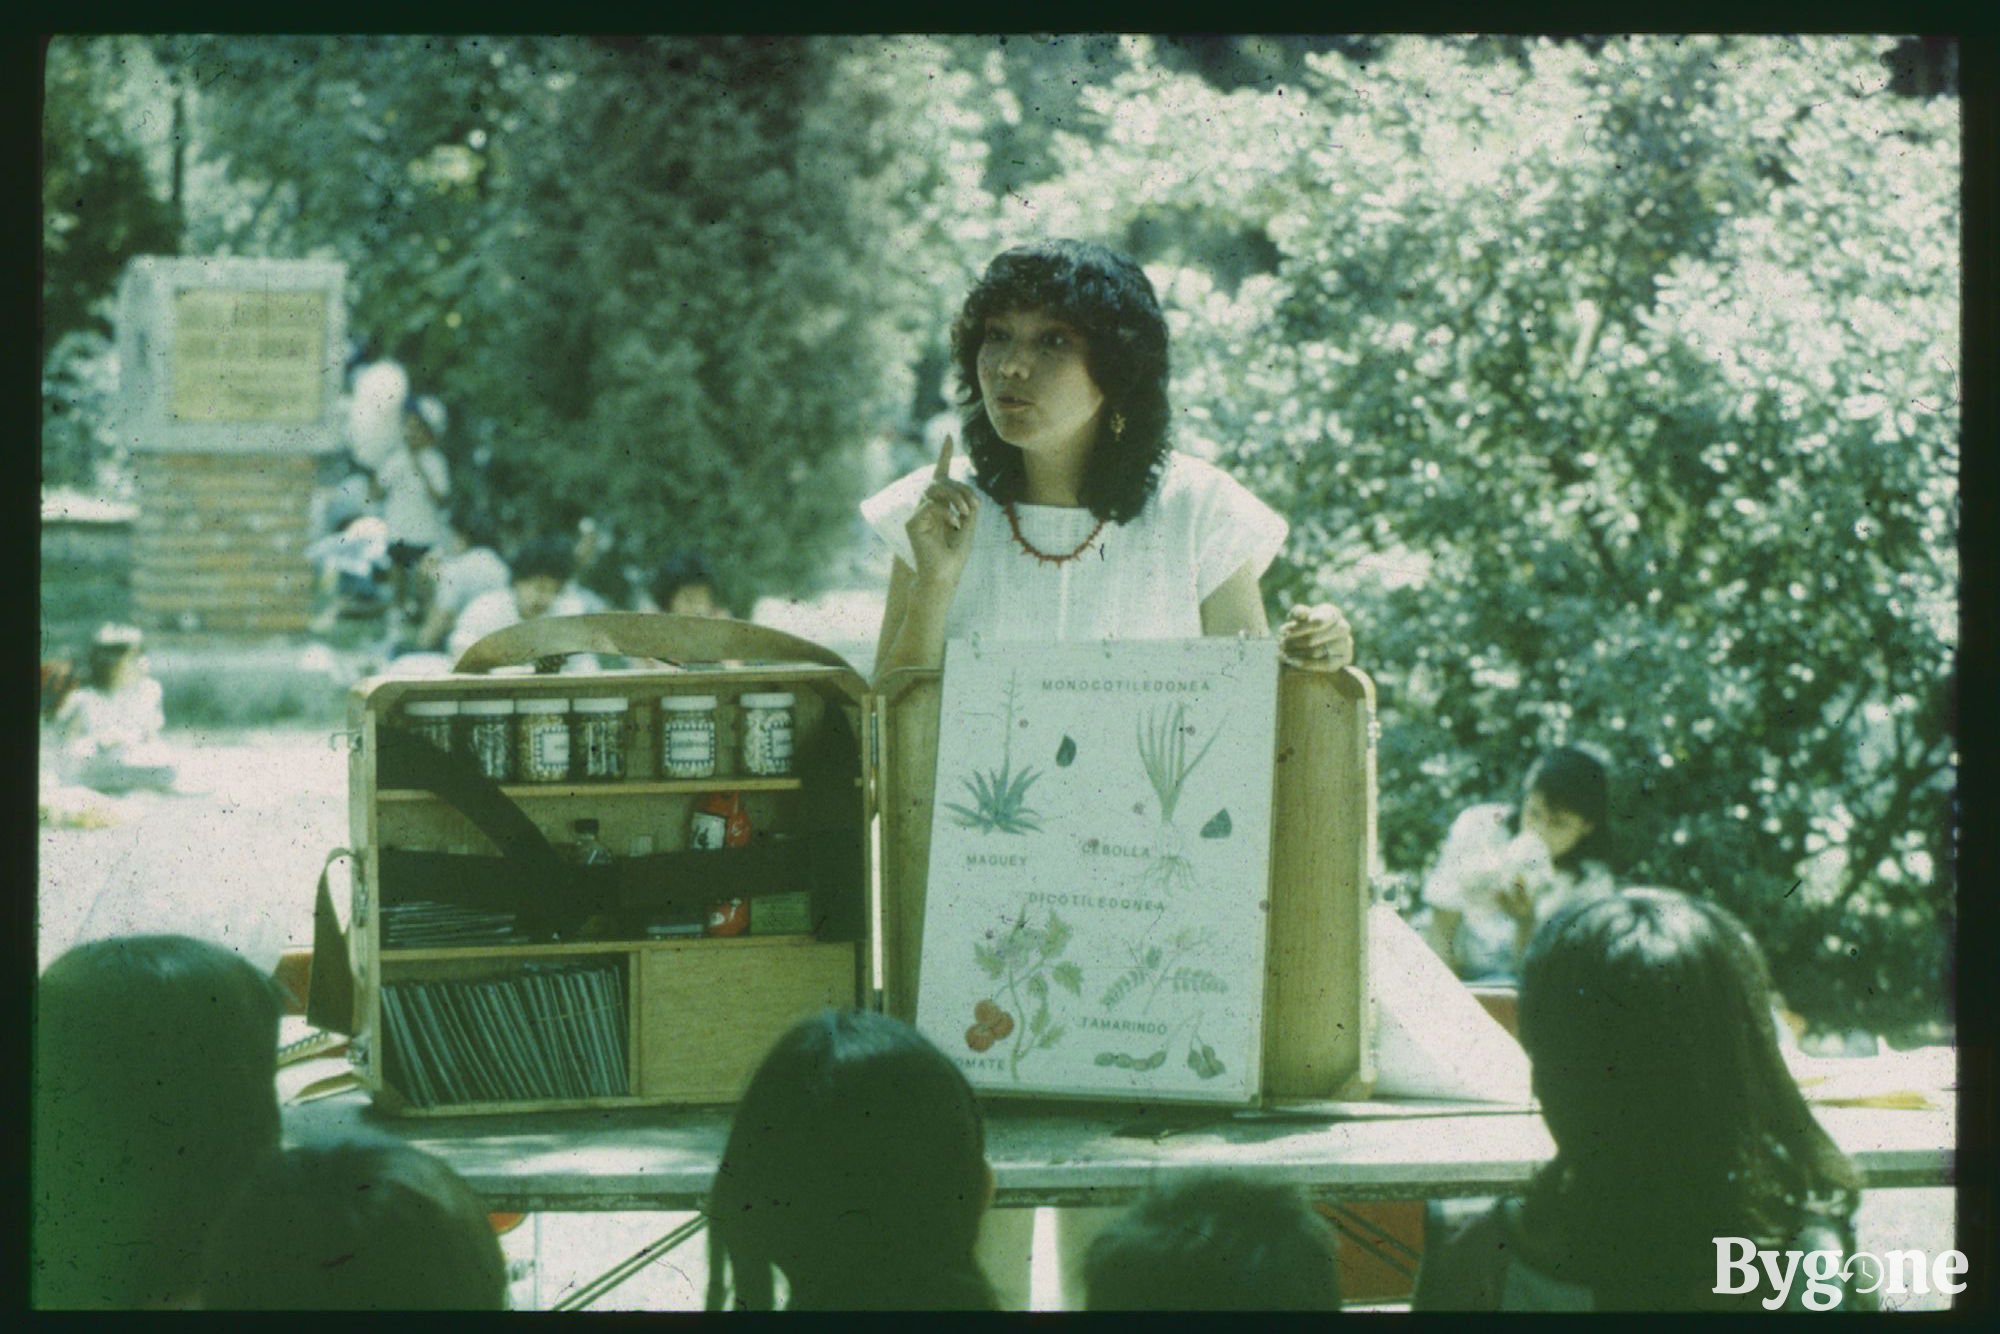 A young woman with dark black short hair with a fringe, is enthusiastically talking to a group of young children, in an outside park. The woman has an open standing wooden case on a table that contains jars of seeds and a board with hand-drawn studies of plants, and their names. The board reads, Monocotiledonea, Maguey, Cebolla, Dicotiledonea, Jamarindo and Tomate.